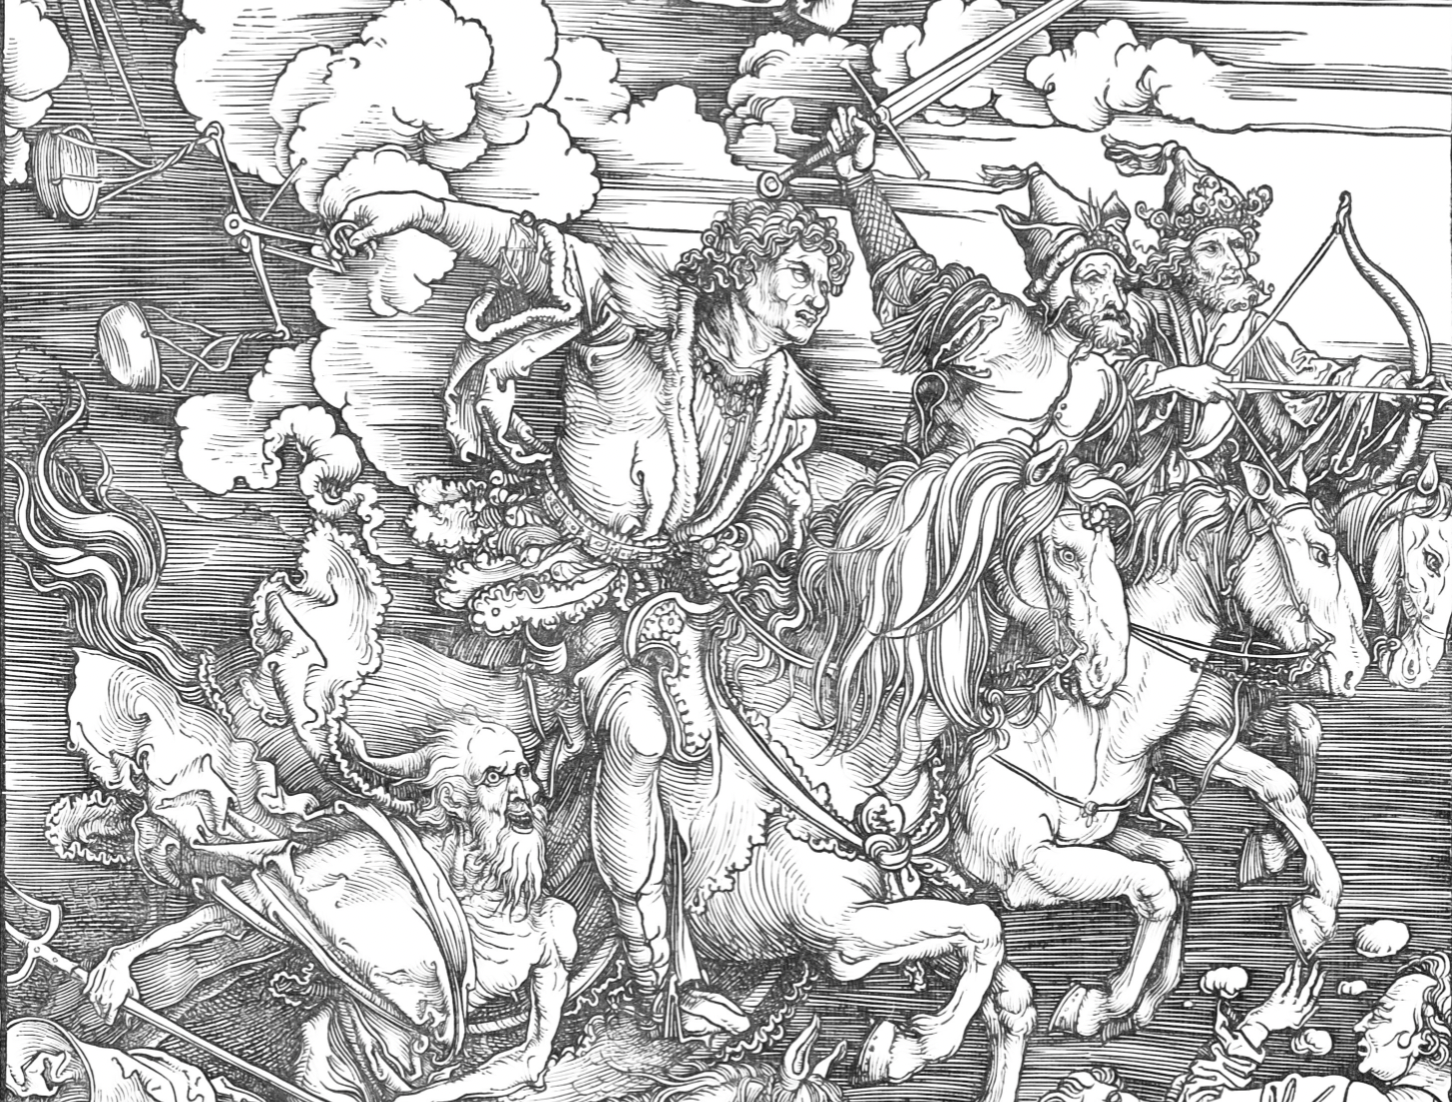 The Four Horsemen of the Apocalypse, from The Apocalypse (1496–1498) by Albrecht Dürer - Bible Coloring Page